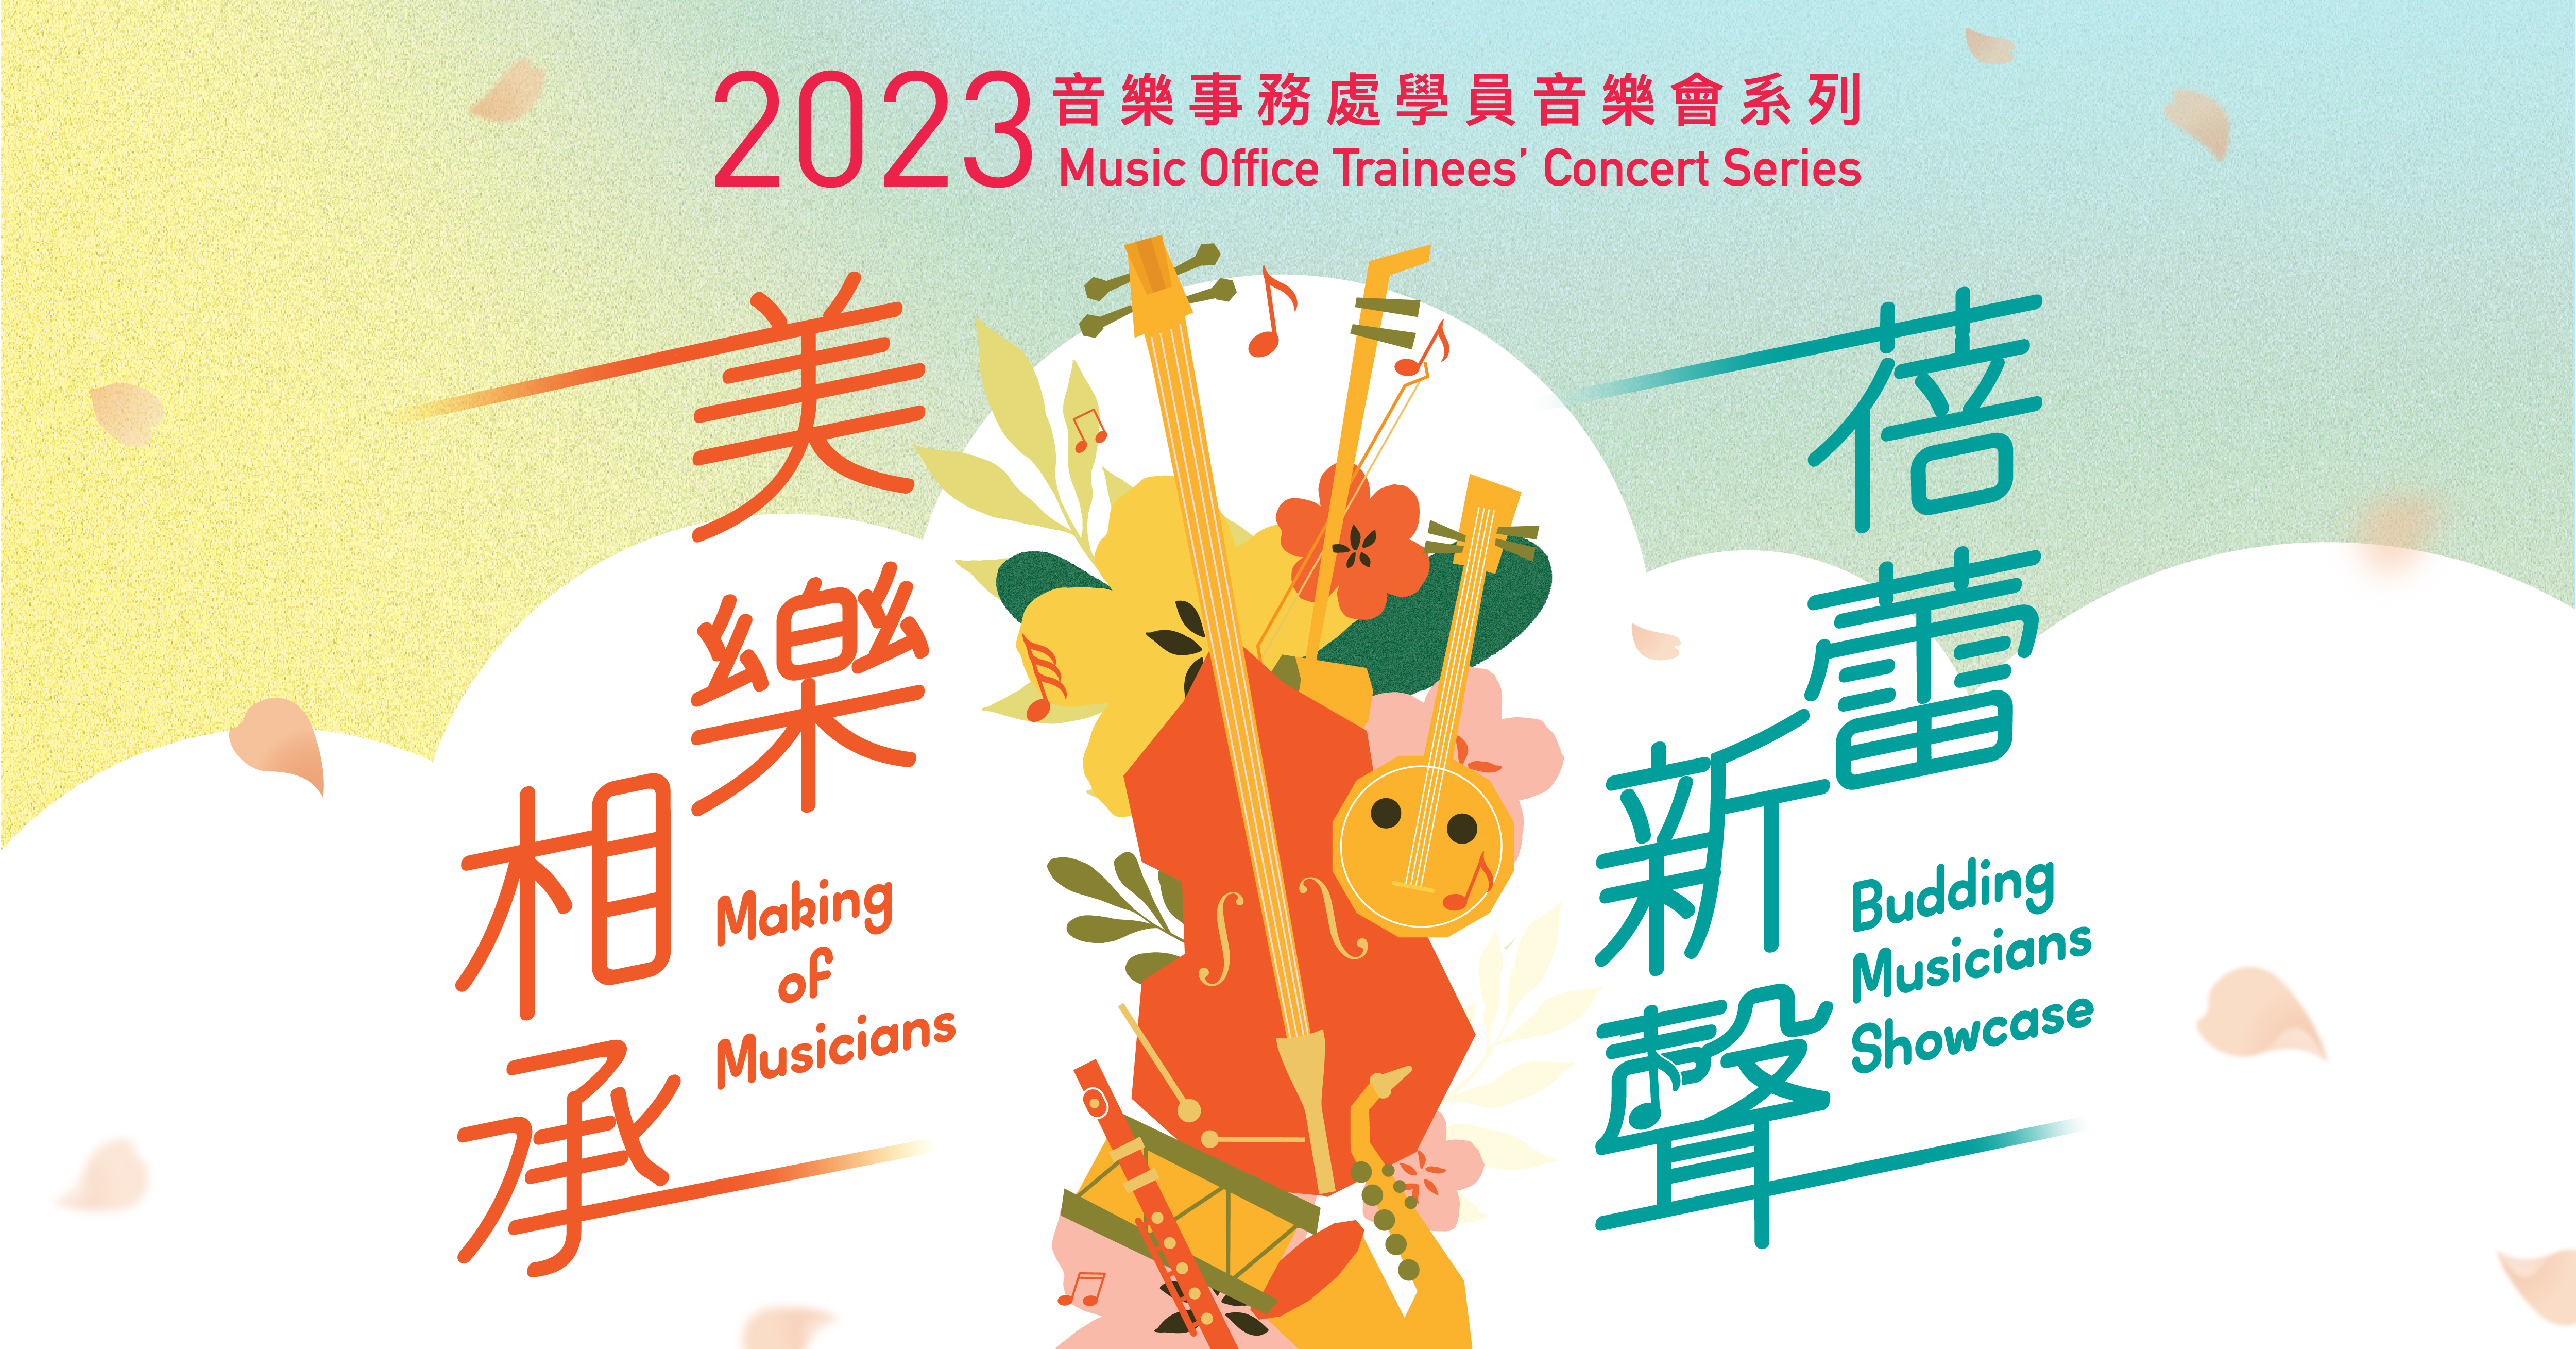 2023 “Making of Musicians” and “Budding Musicians Showcase” Music Office Trainees’ Concerts (Completed)